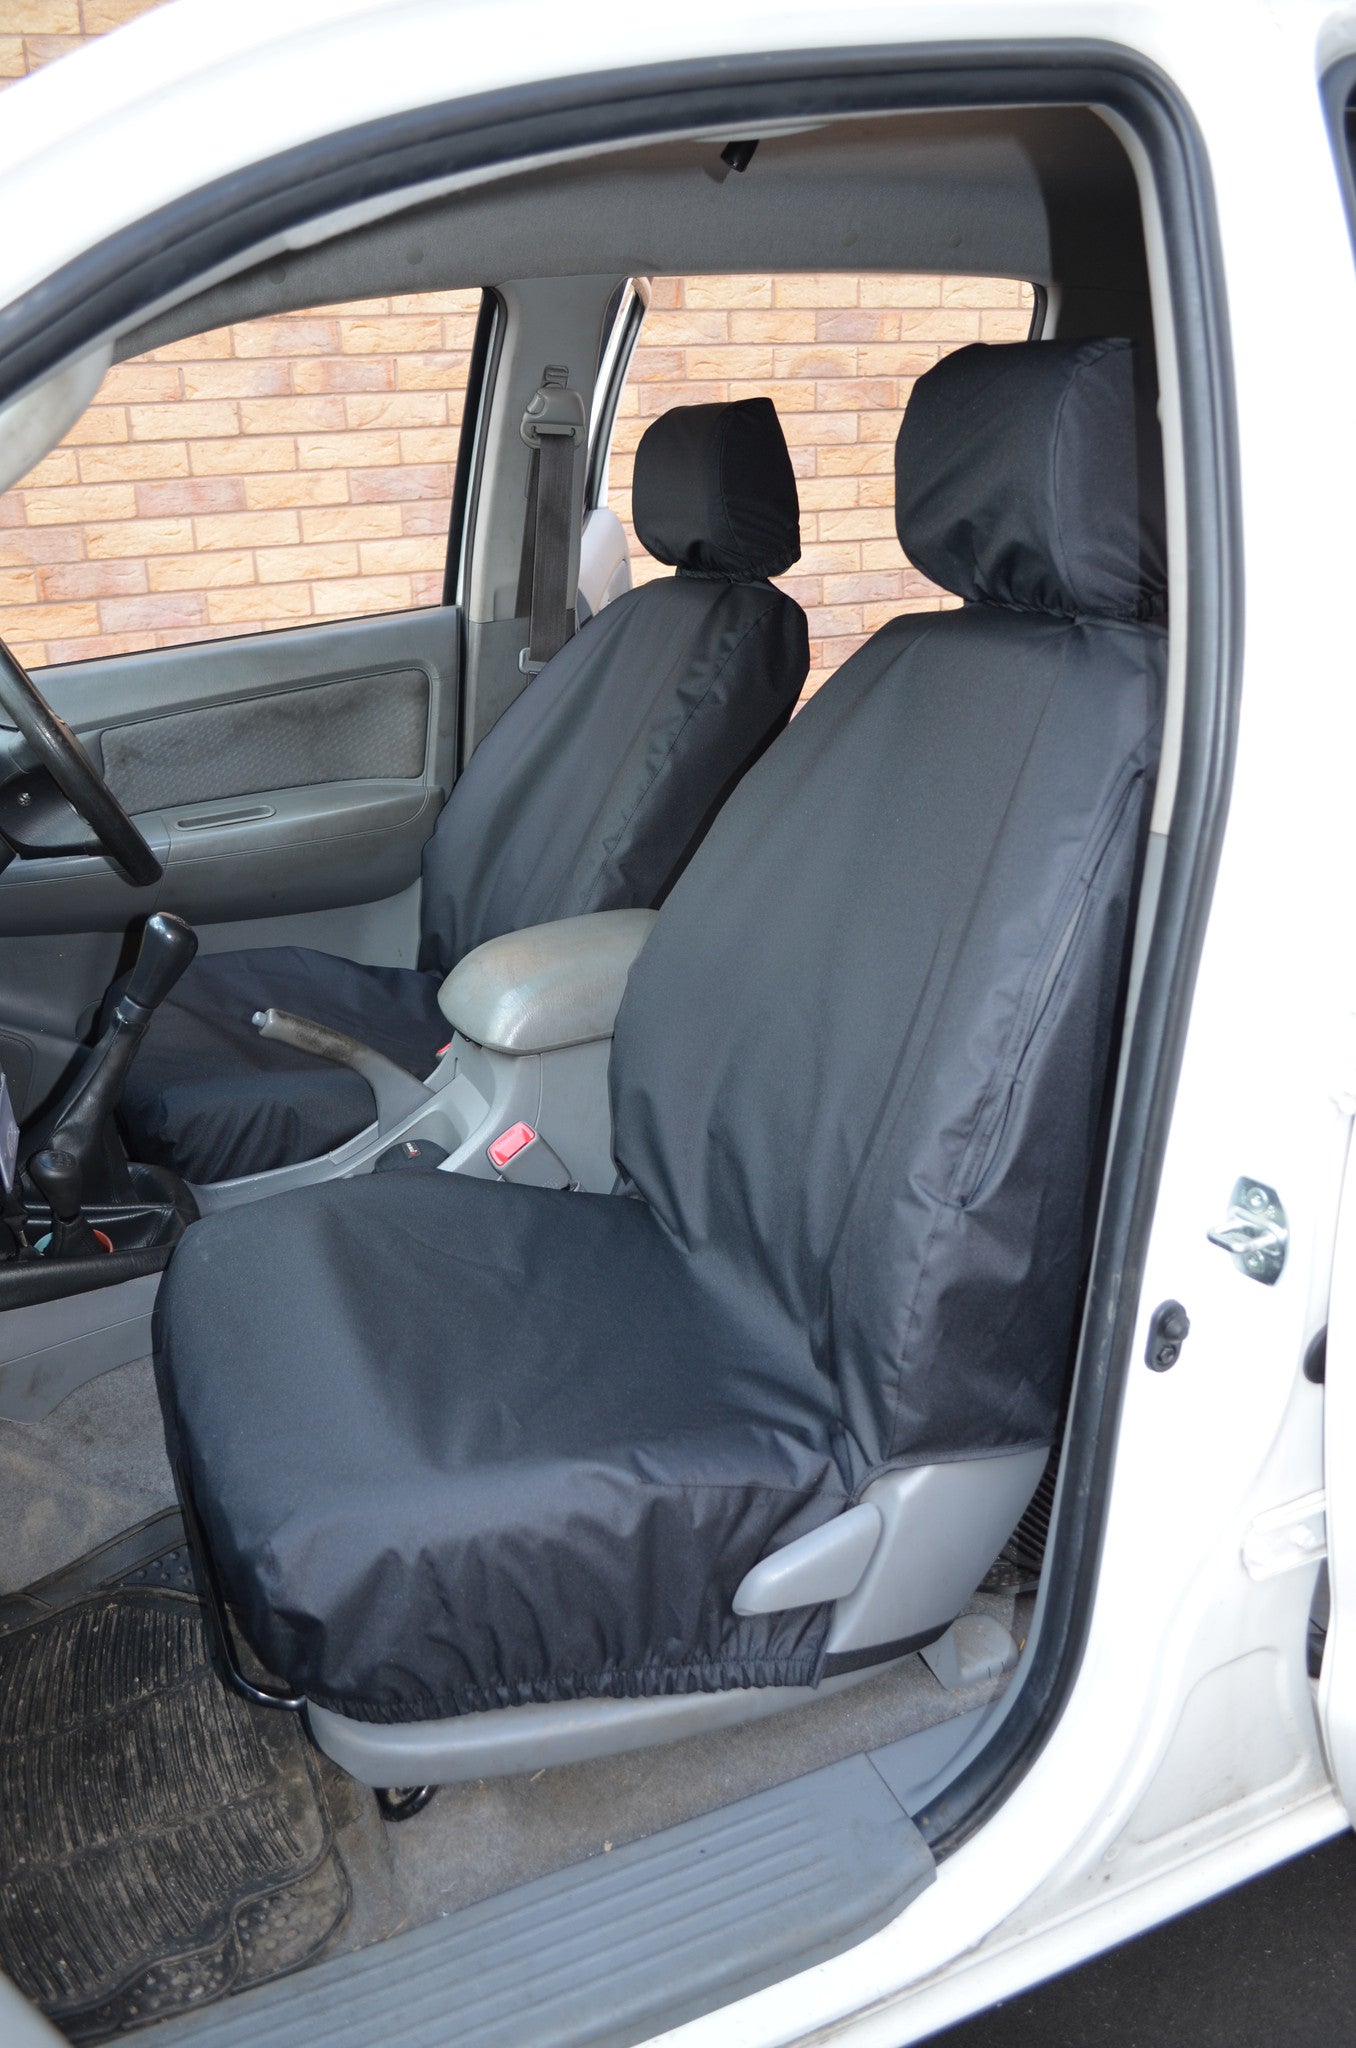 Toyota Hilux Invincible 2005 - 2016 Seat Covers Front Pair Seat Covers / Black Turtle Covers Ltd